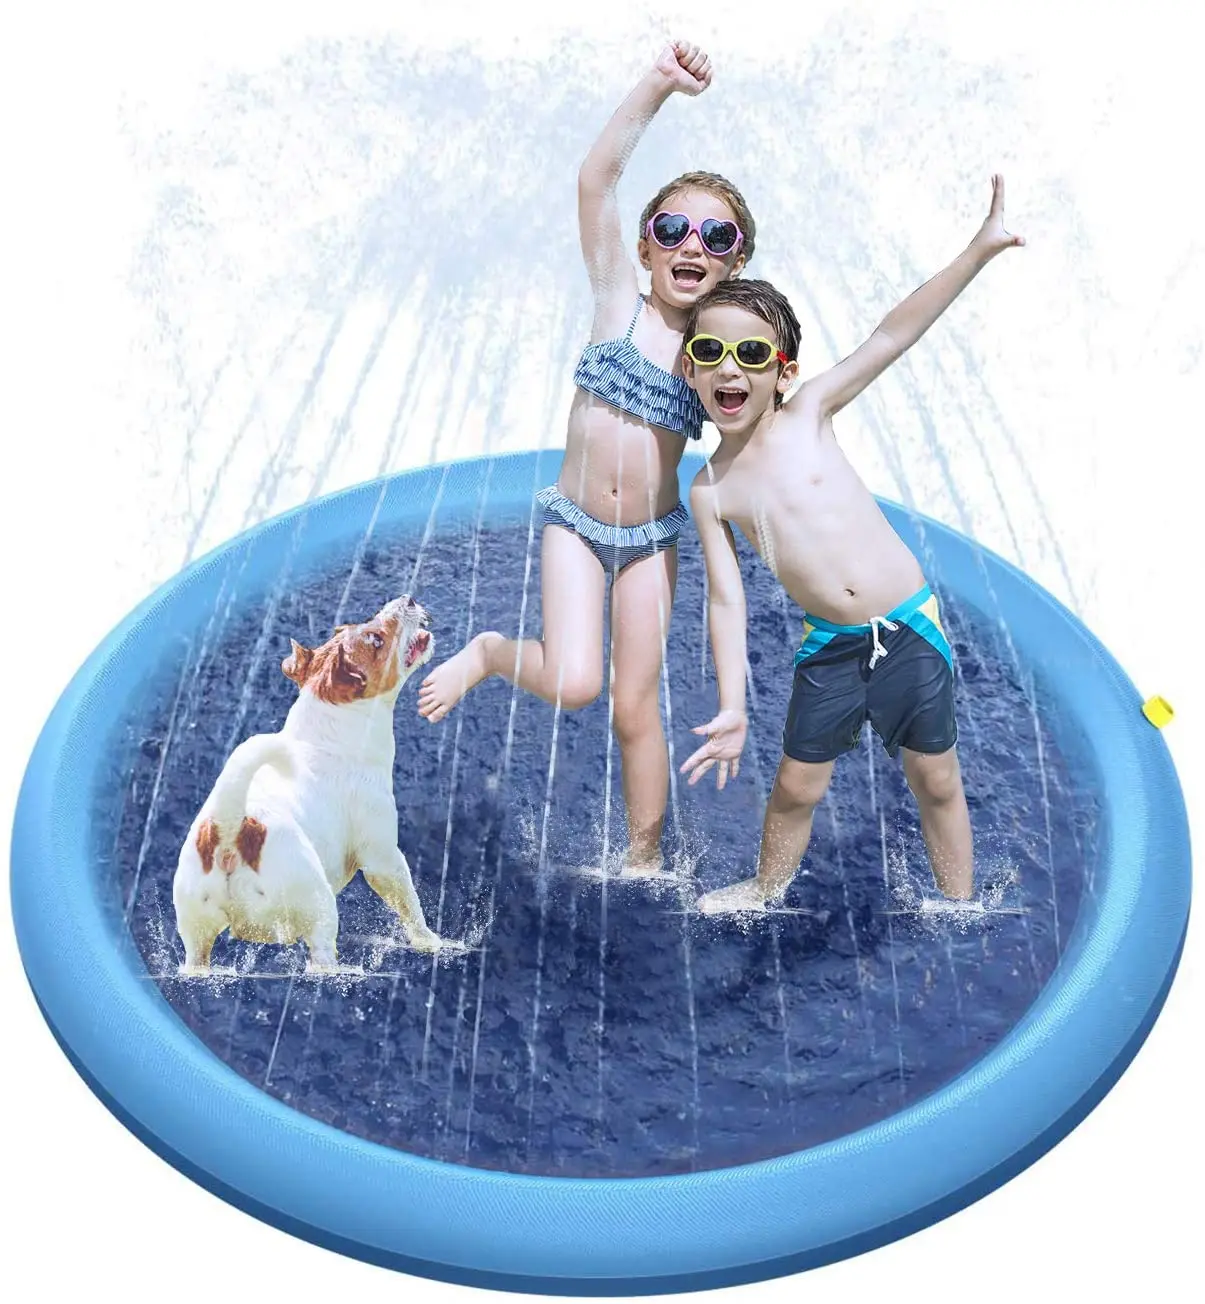 59inch Thicken Dog Pool with Sprinkler Splash Sprinkler Pad for Dogs Cats and Kiddie